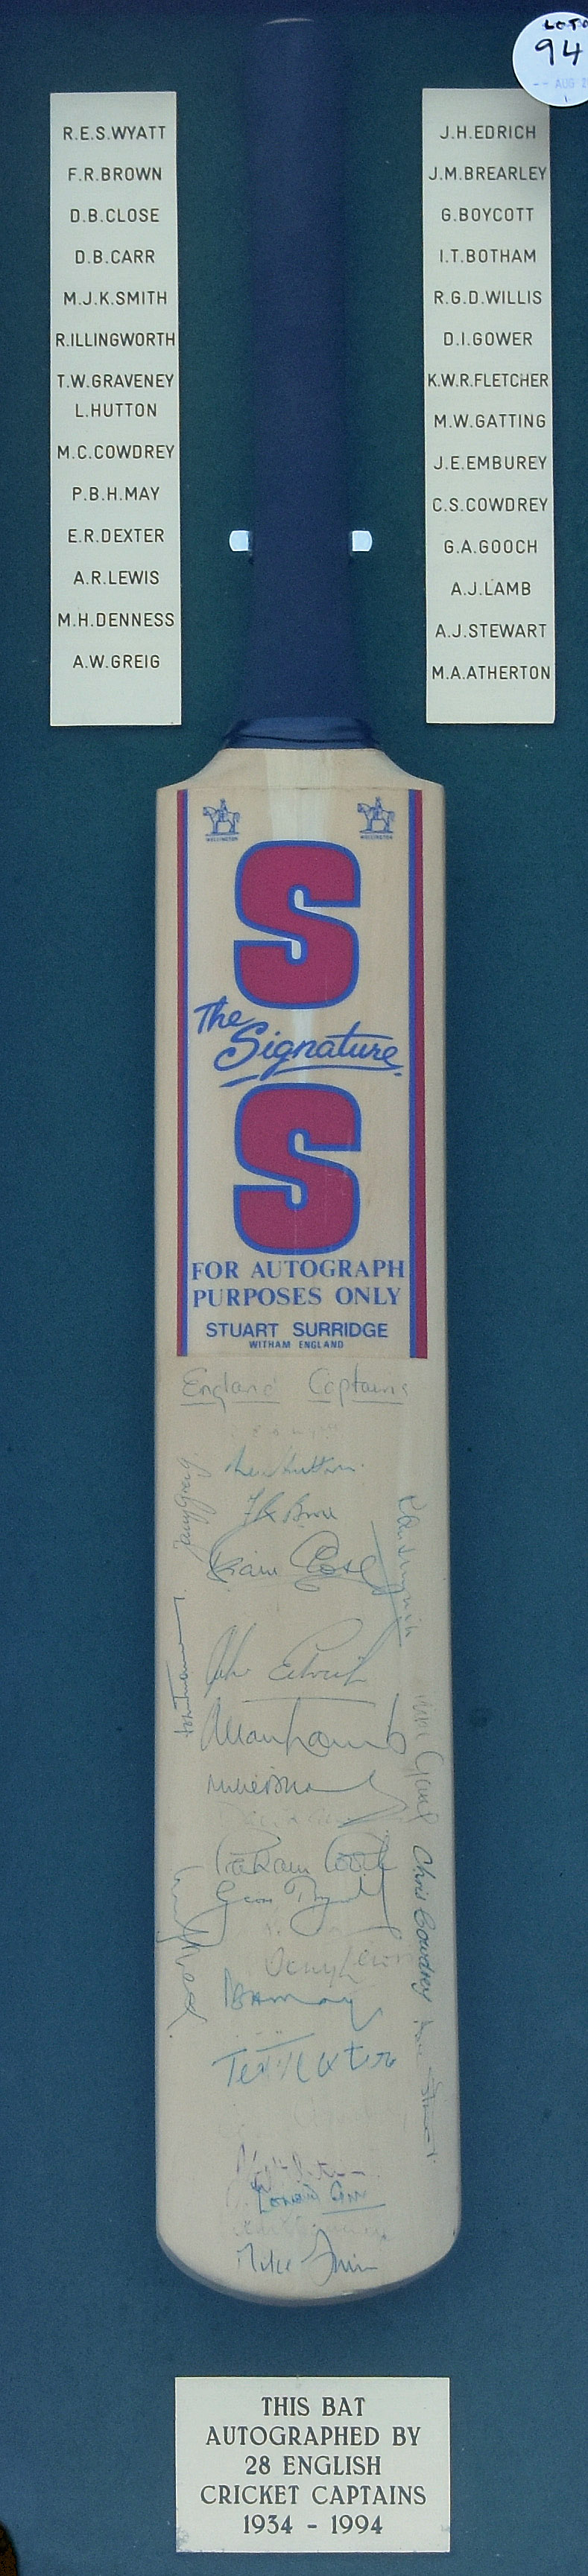 England Captains 1954-1994 Signed Cricket Bat includes 28 signatures to include Wyatt, Brown, Close,